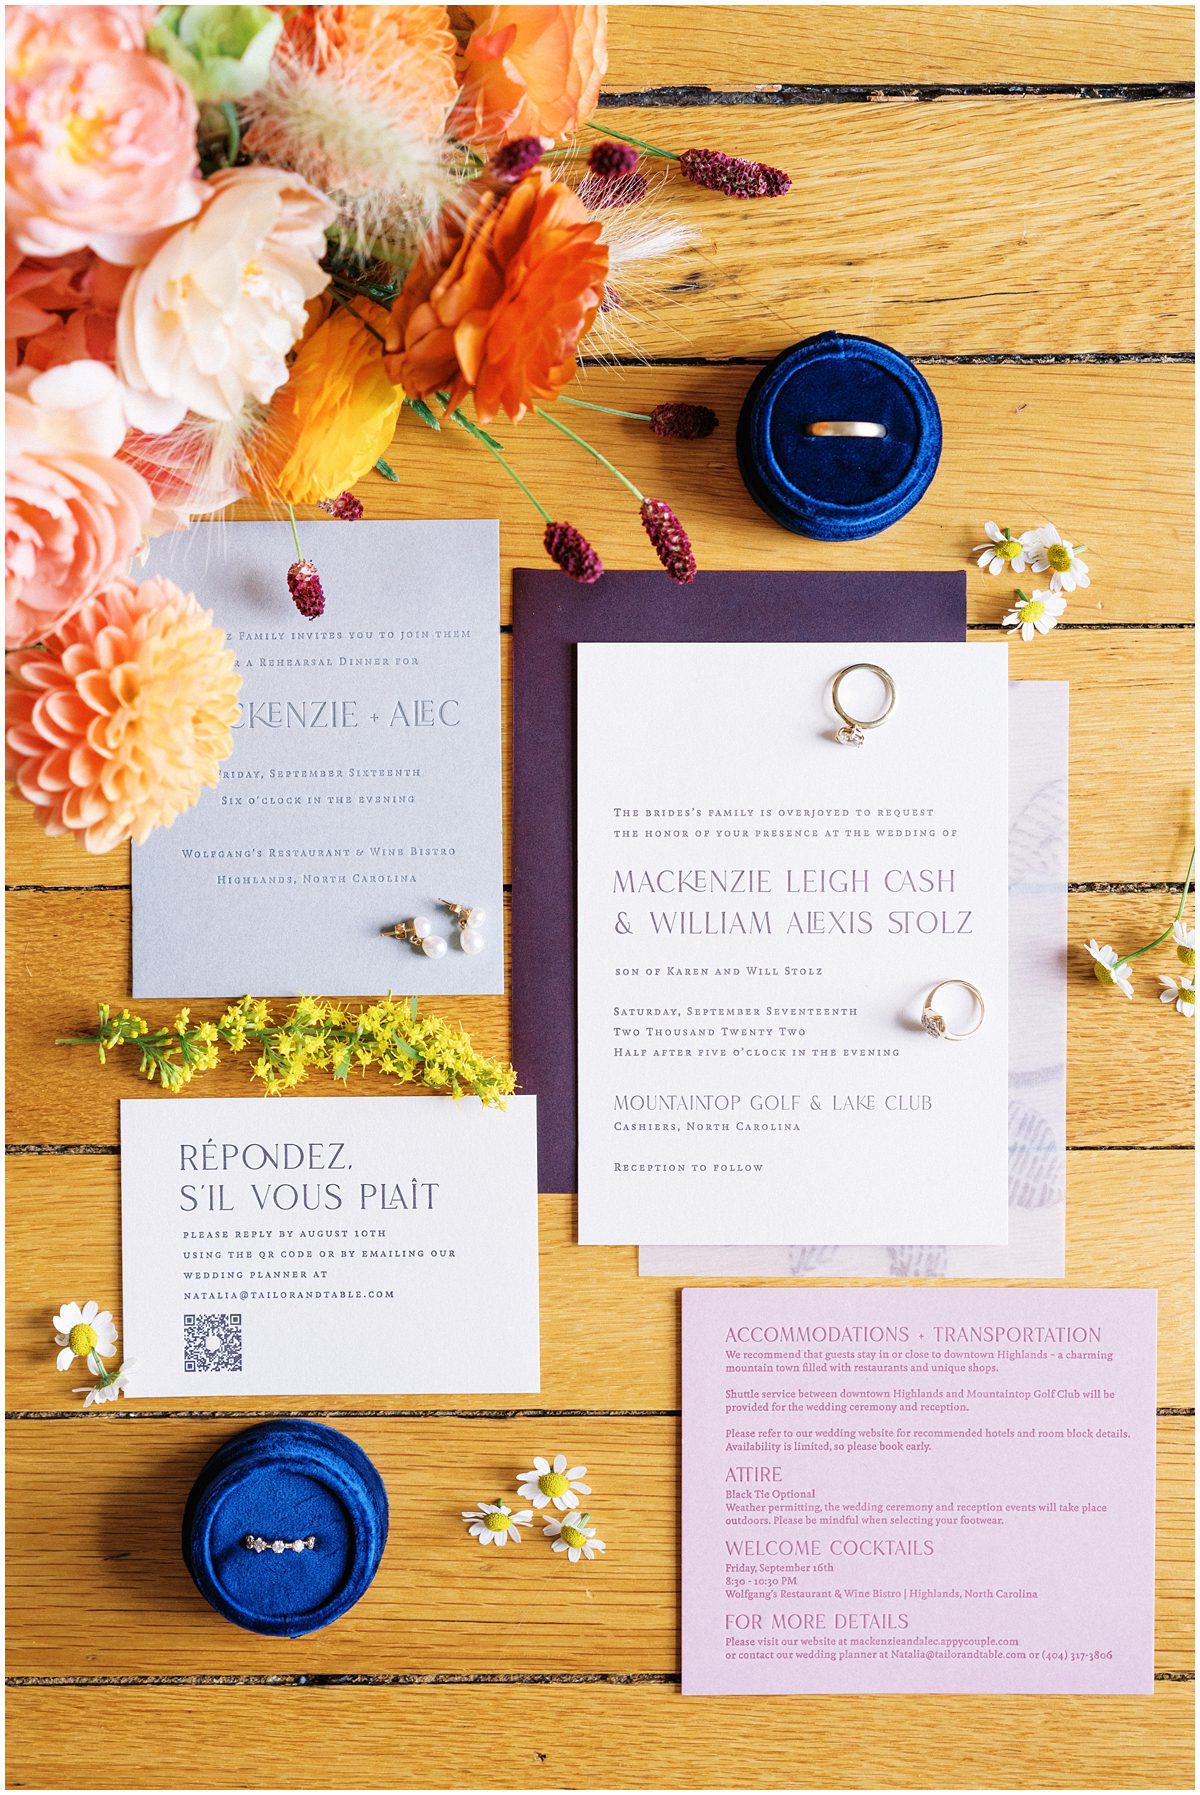 An elegant letterpress wedding invitation suite with intricate details and beautiful typography designed by The Impressionist, featuring the couple's names and wedding details in a classic and sophisticated style